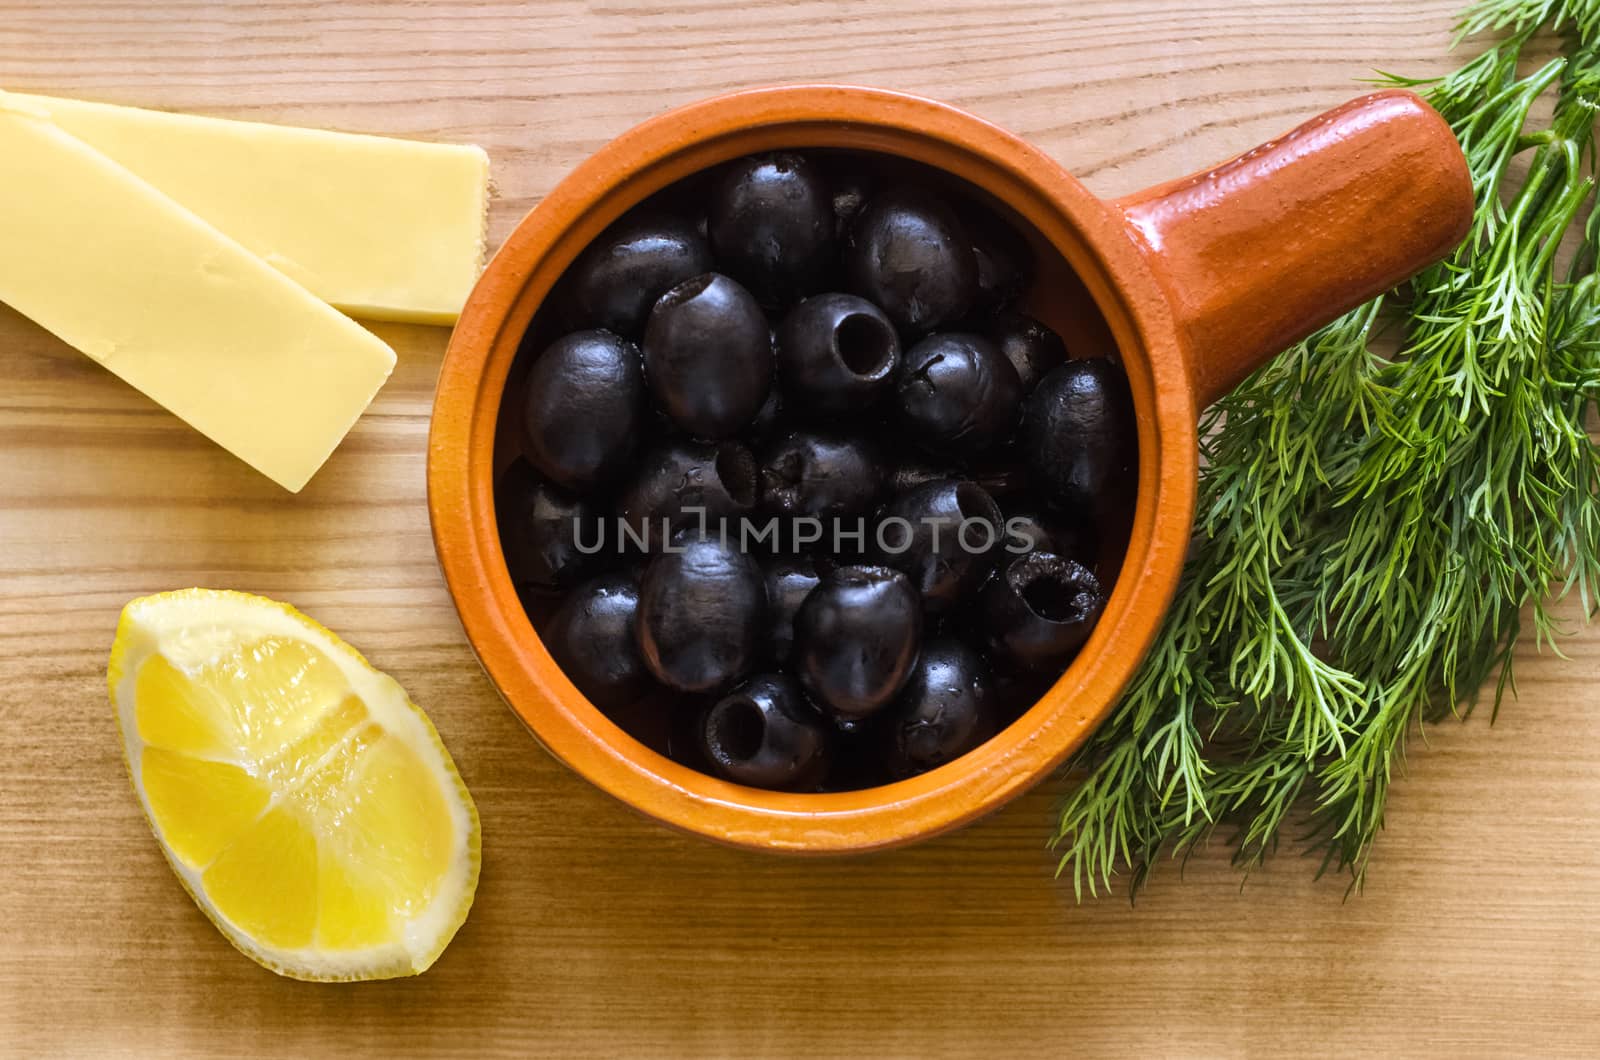 Black olives in a Cup on the table by Gaina